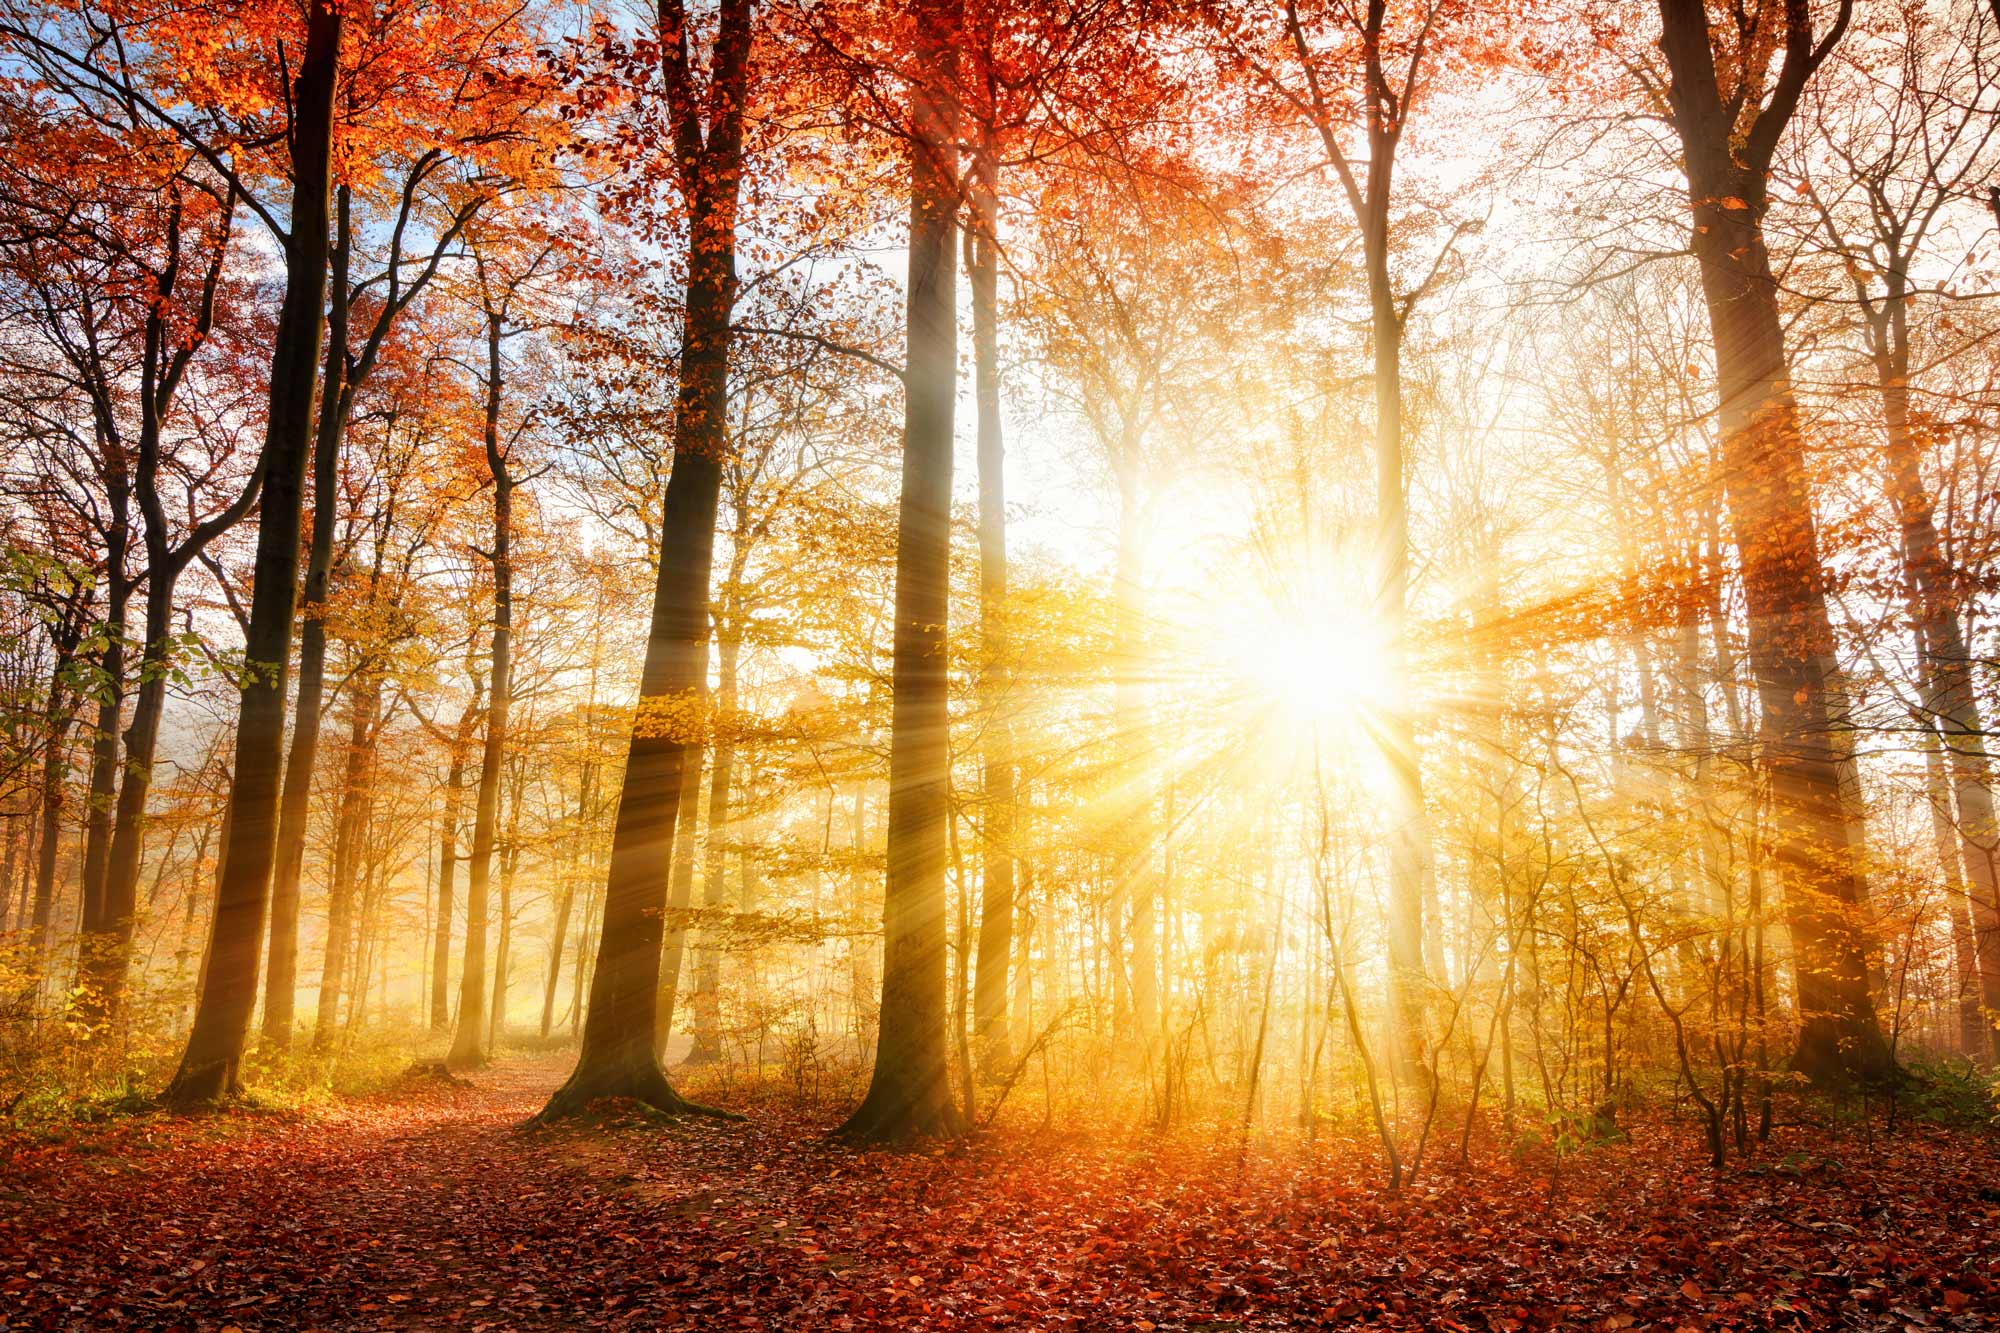 The sun setting in a forest during fall. The leaves have all turned red, the trees are half bare, and there is a bad of red leaves glowing in the sunlight on the ground.